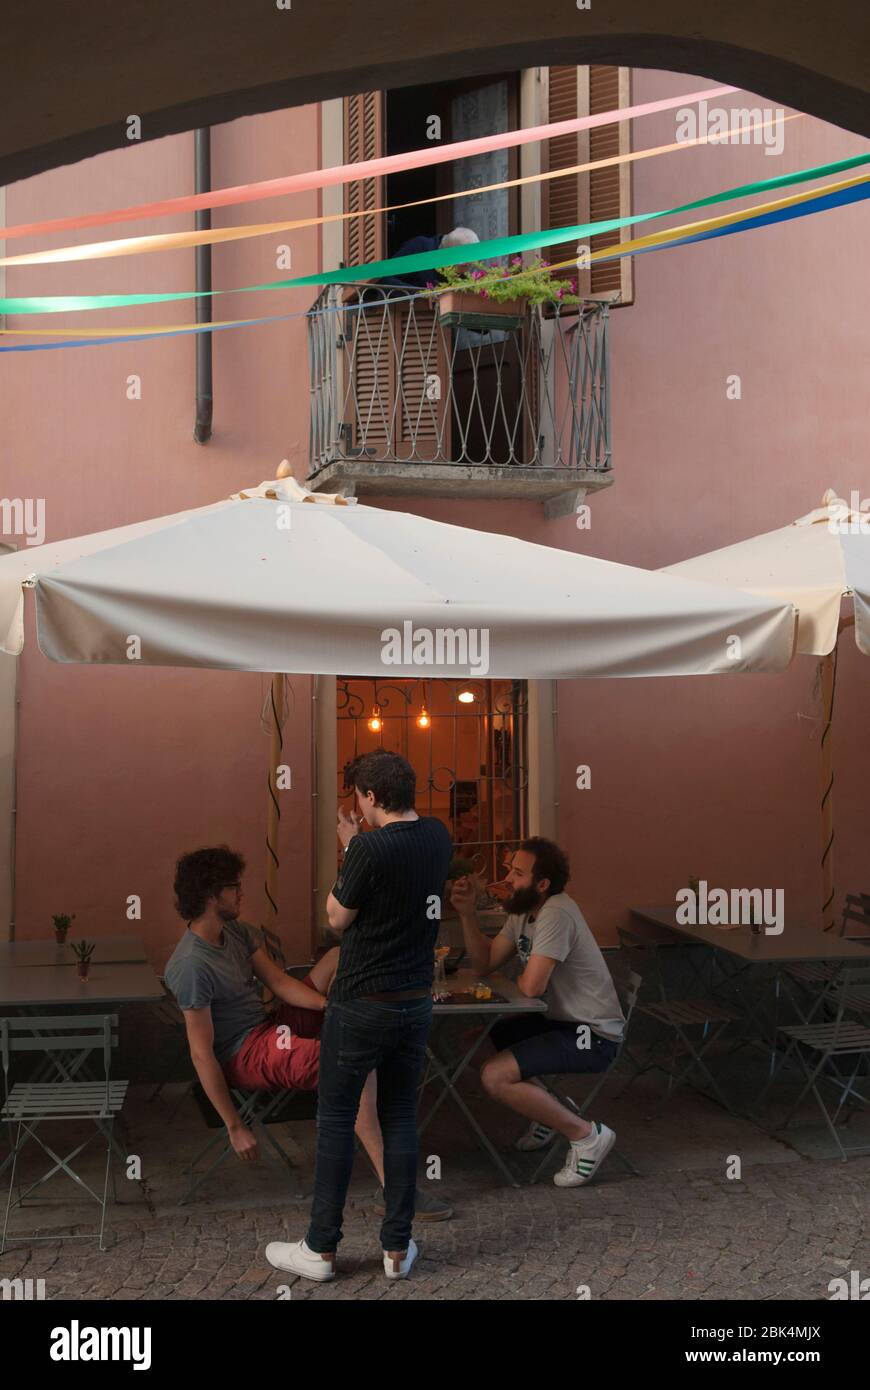 Cuneo Piedmont, Northern Italy young Italian men sitting chatting outside a bar cafe after work, an apparent casual lifestyle.  2019 HOMER SYKES Stock Photo